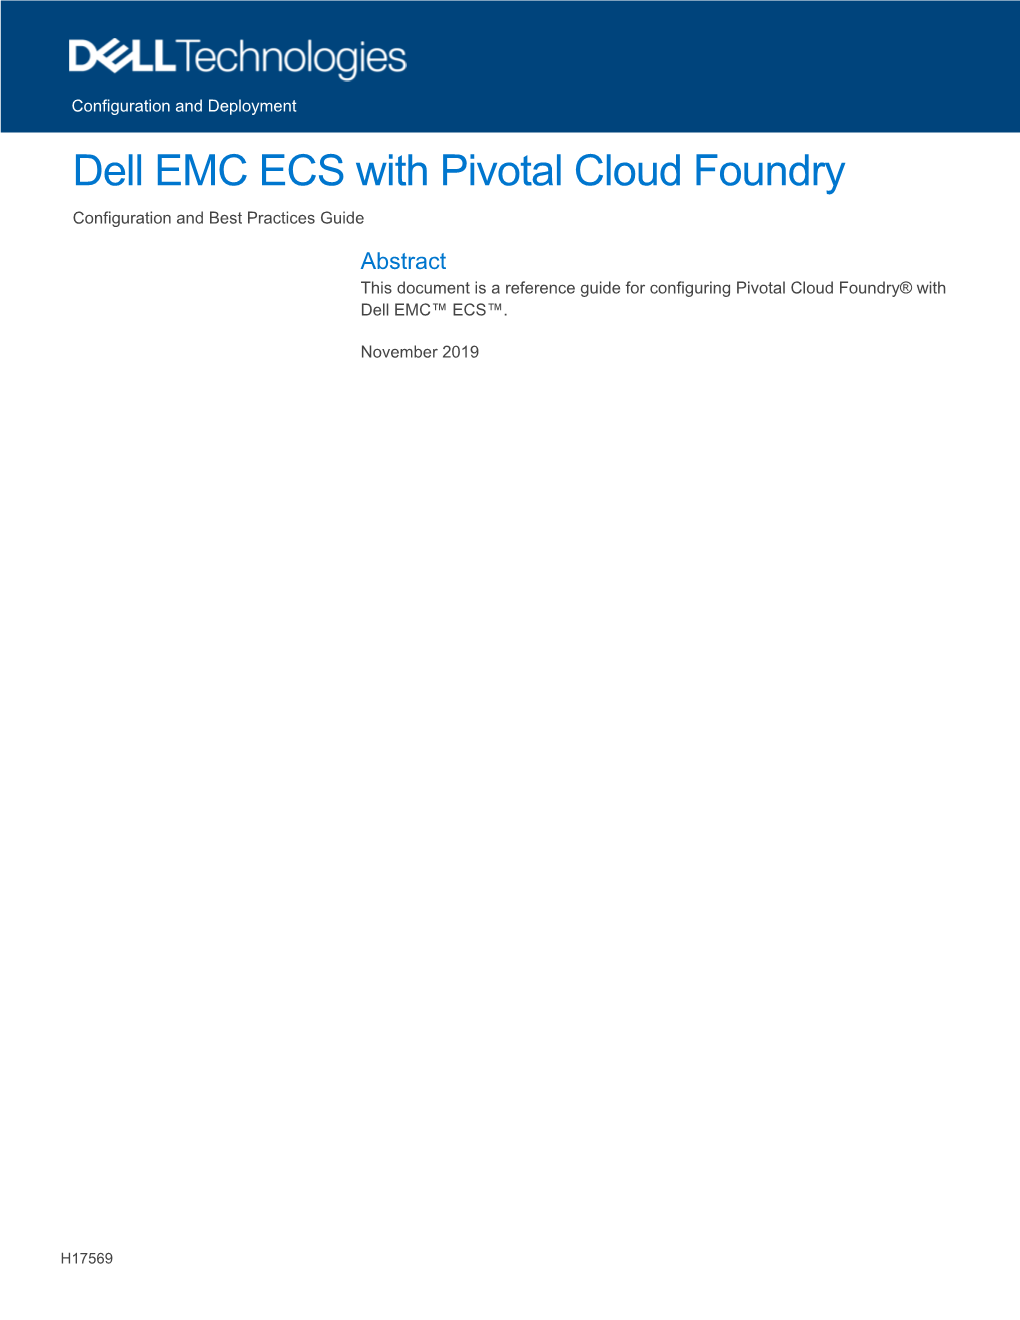 Dell EMC ECS with Pivotal Cloud Foundry Configuration Guide and Best Practices